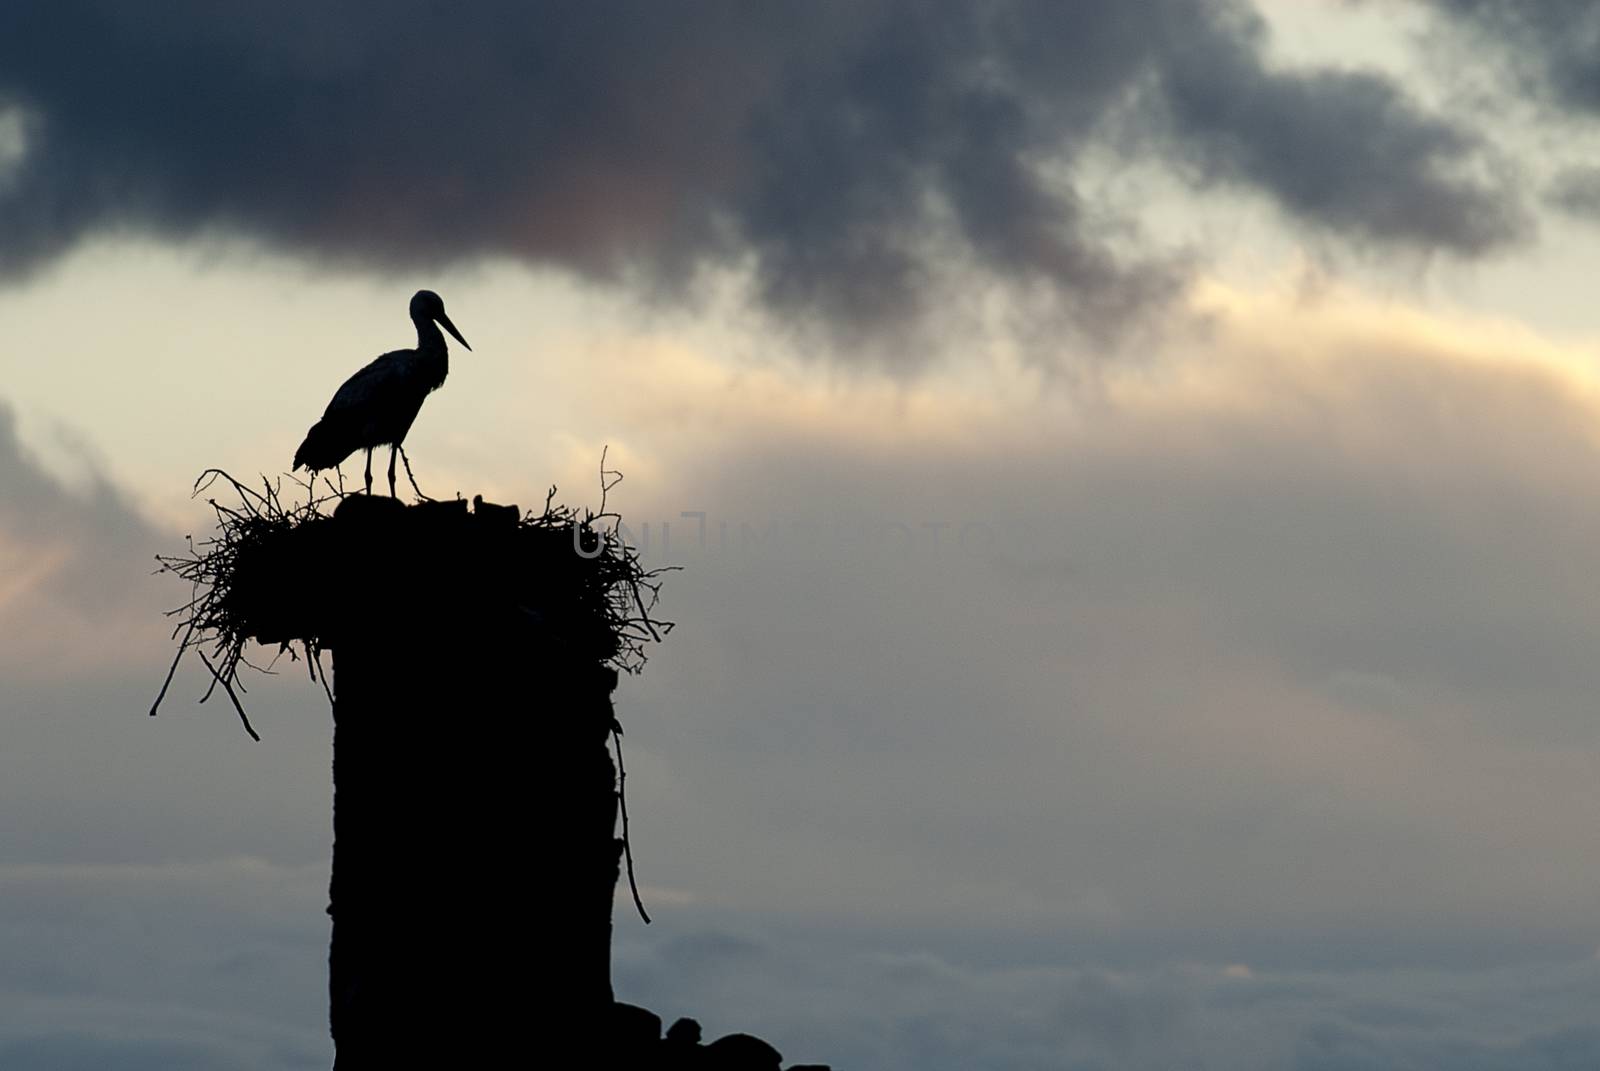 White stork in its nest at sunset (Ciconia ciconia) by jalonsohu@gmail.com